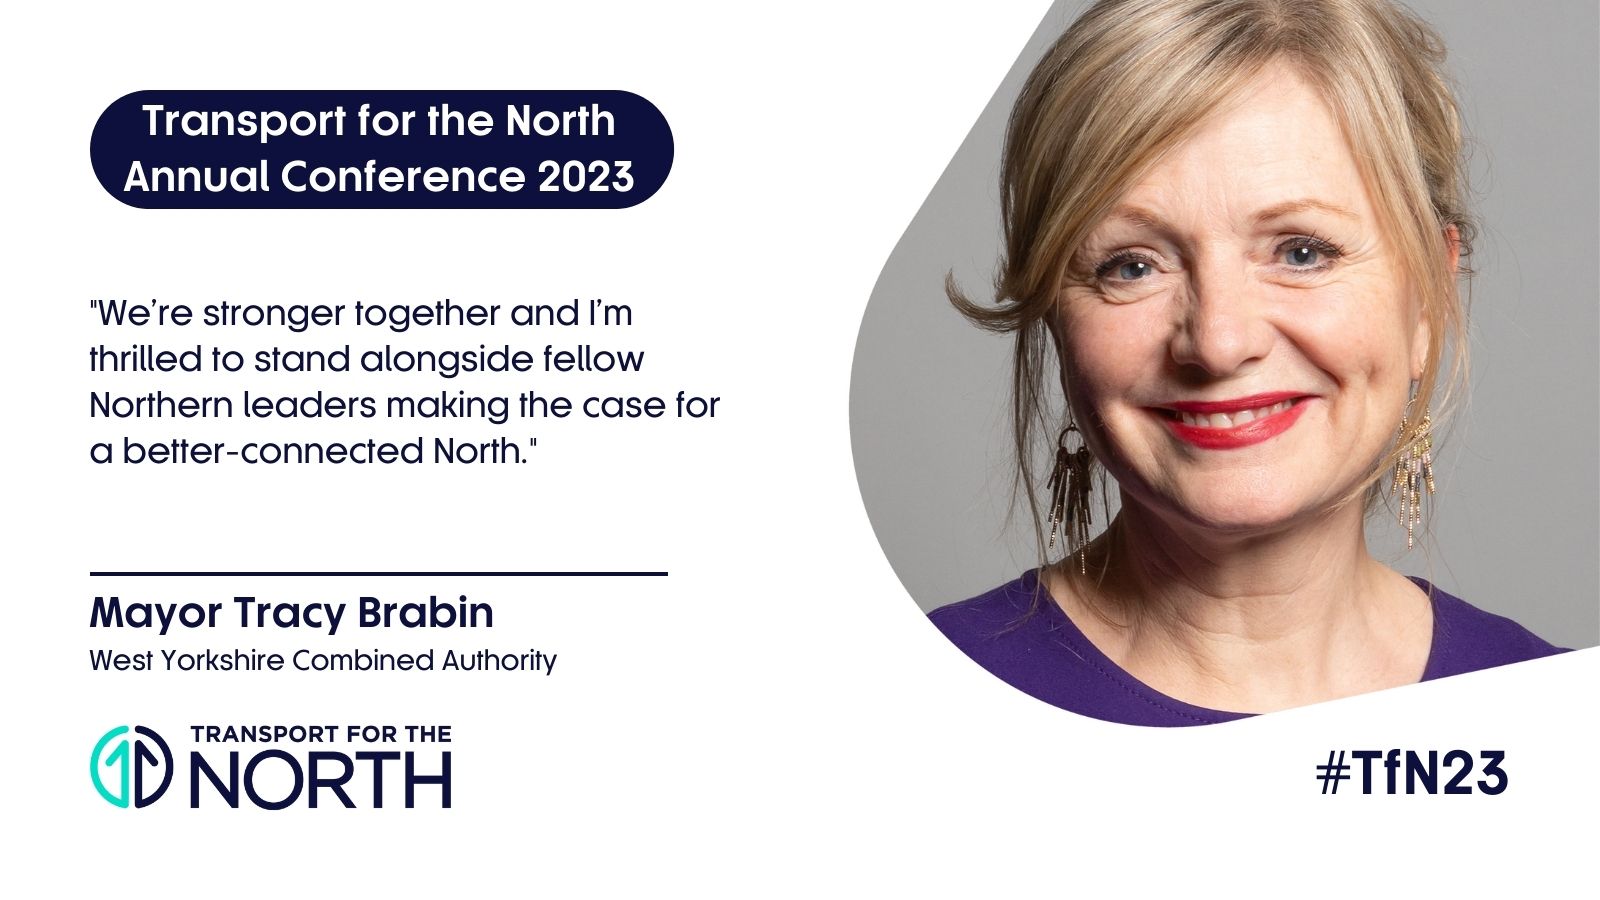 Mayor Tracy Brabin comment ahead of TfN23